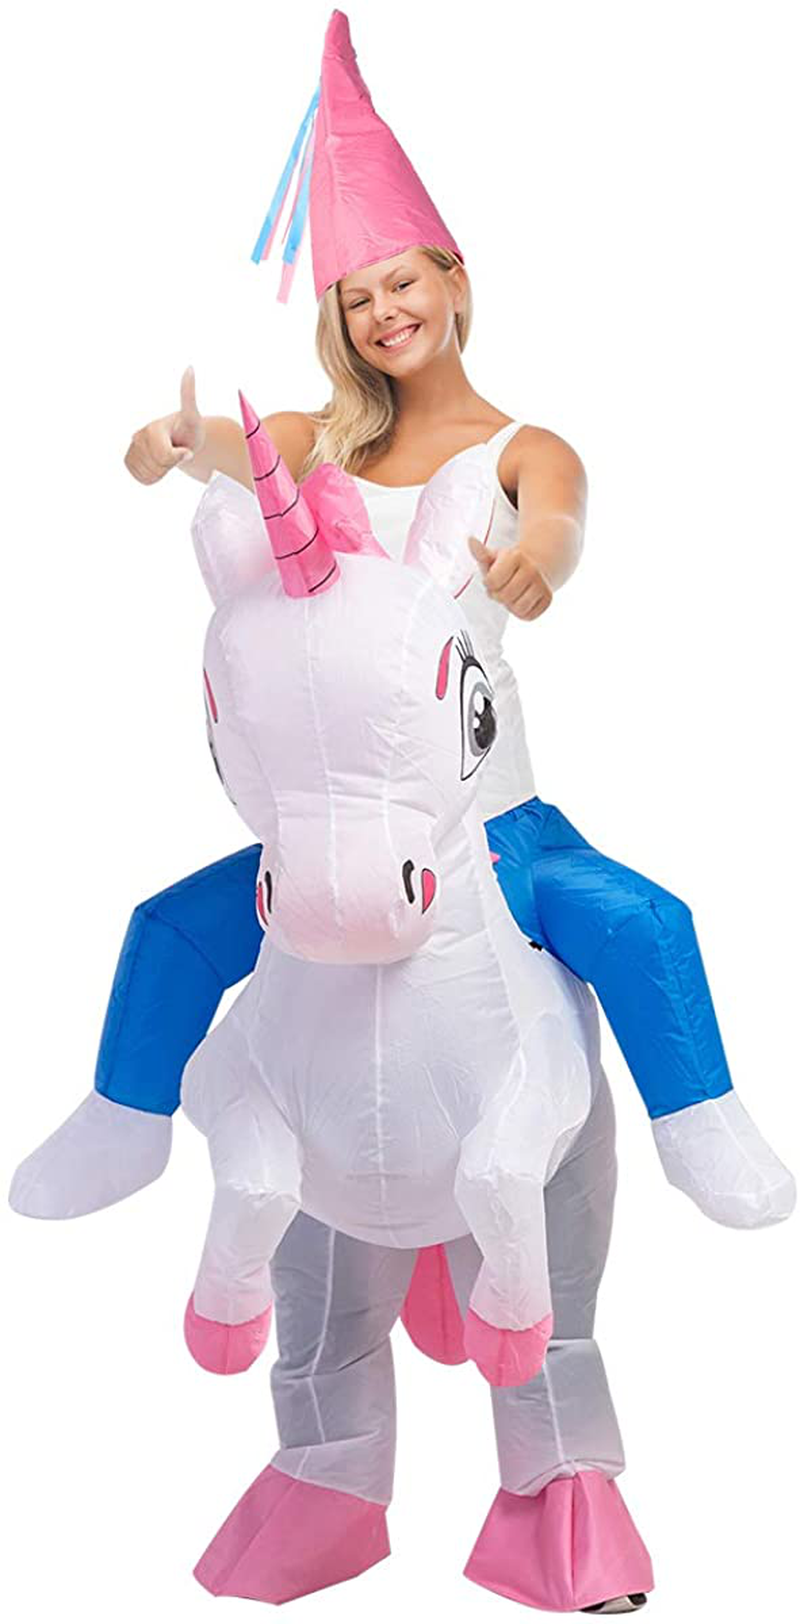 GOOSH Inflatable Costume for Adults, Halloween Costumes Men Women Unicorn Rider, Blow Up Costume for Unisex Godzilla Toy